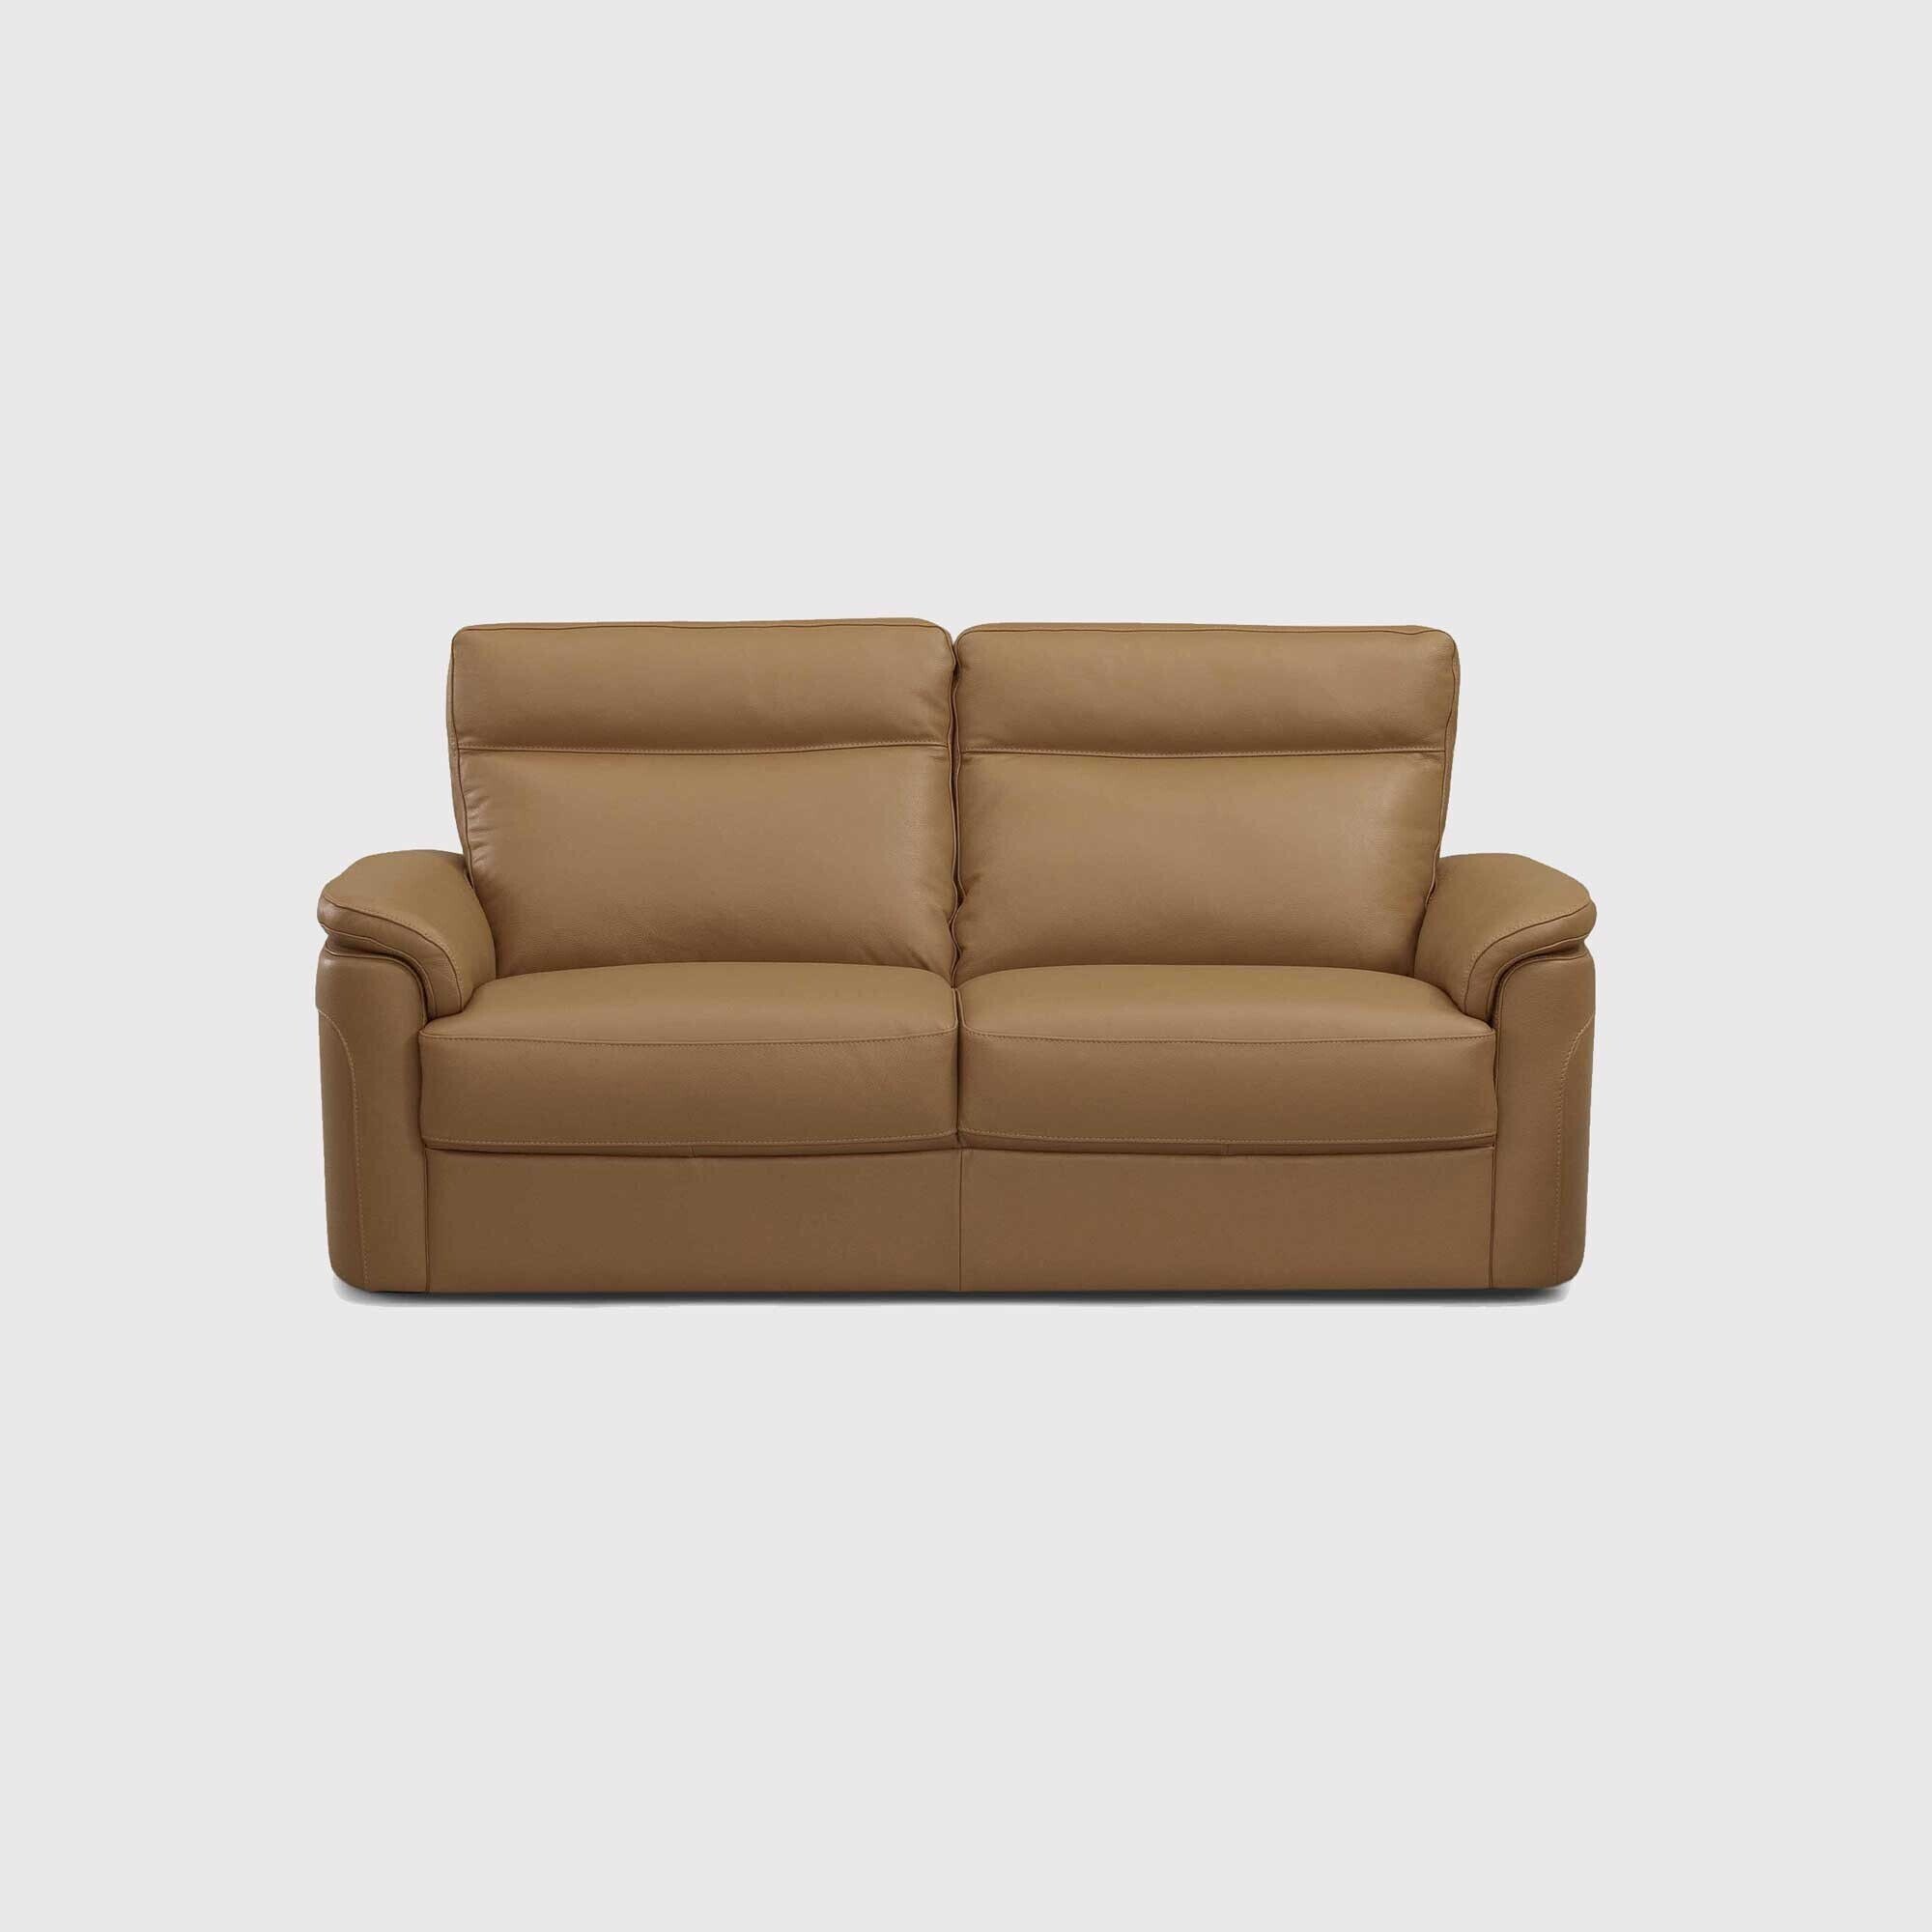 Dumont 2.5 Seater Sofa, Brown Leather - Barker & Stonehouse - image 1